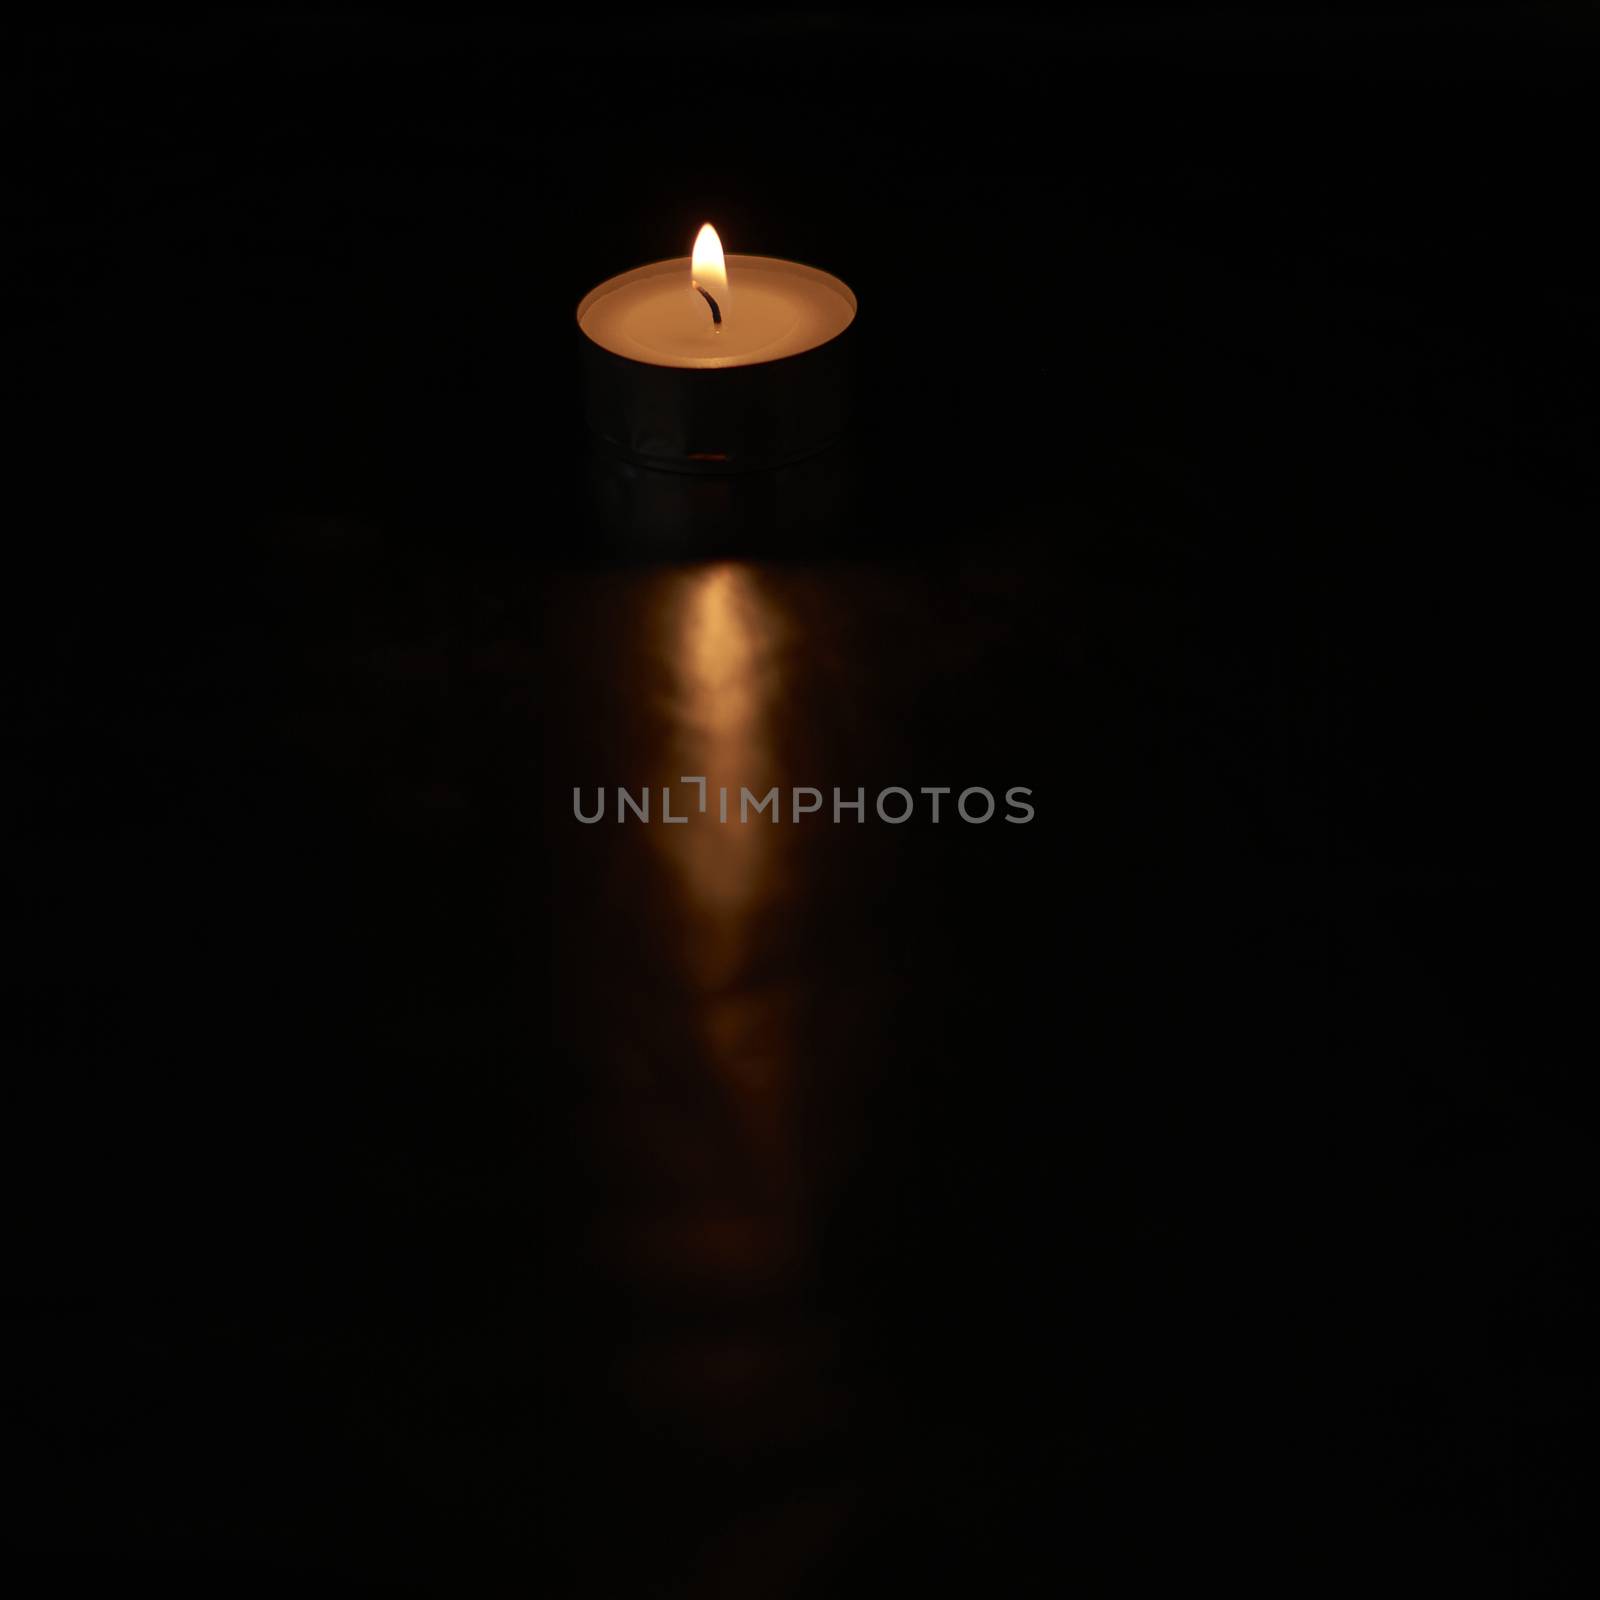 Small burning candle on black background by raul_ruiz